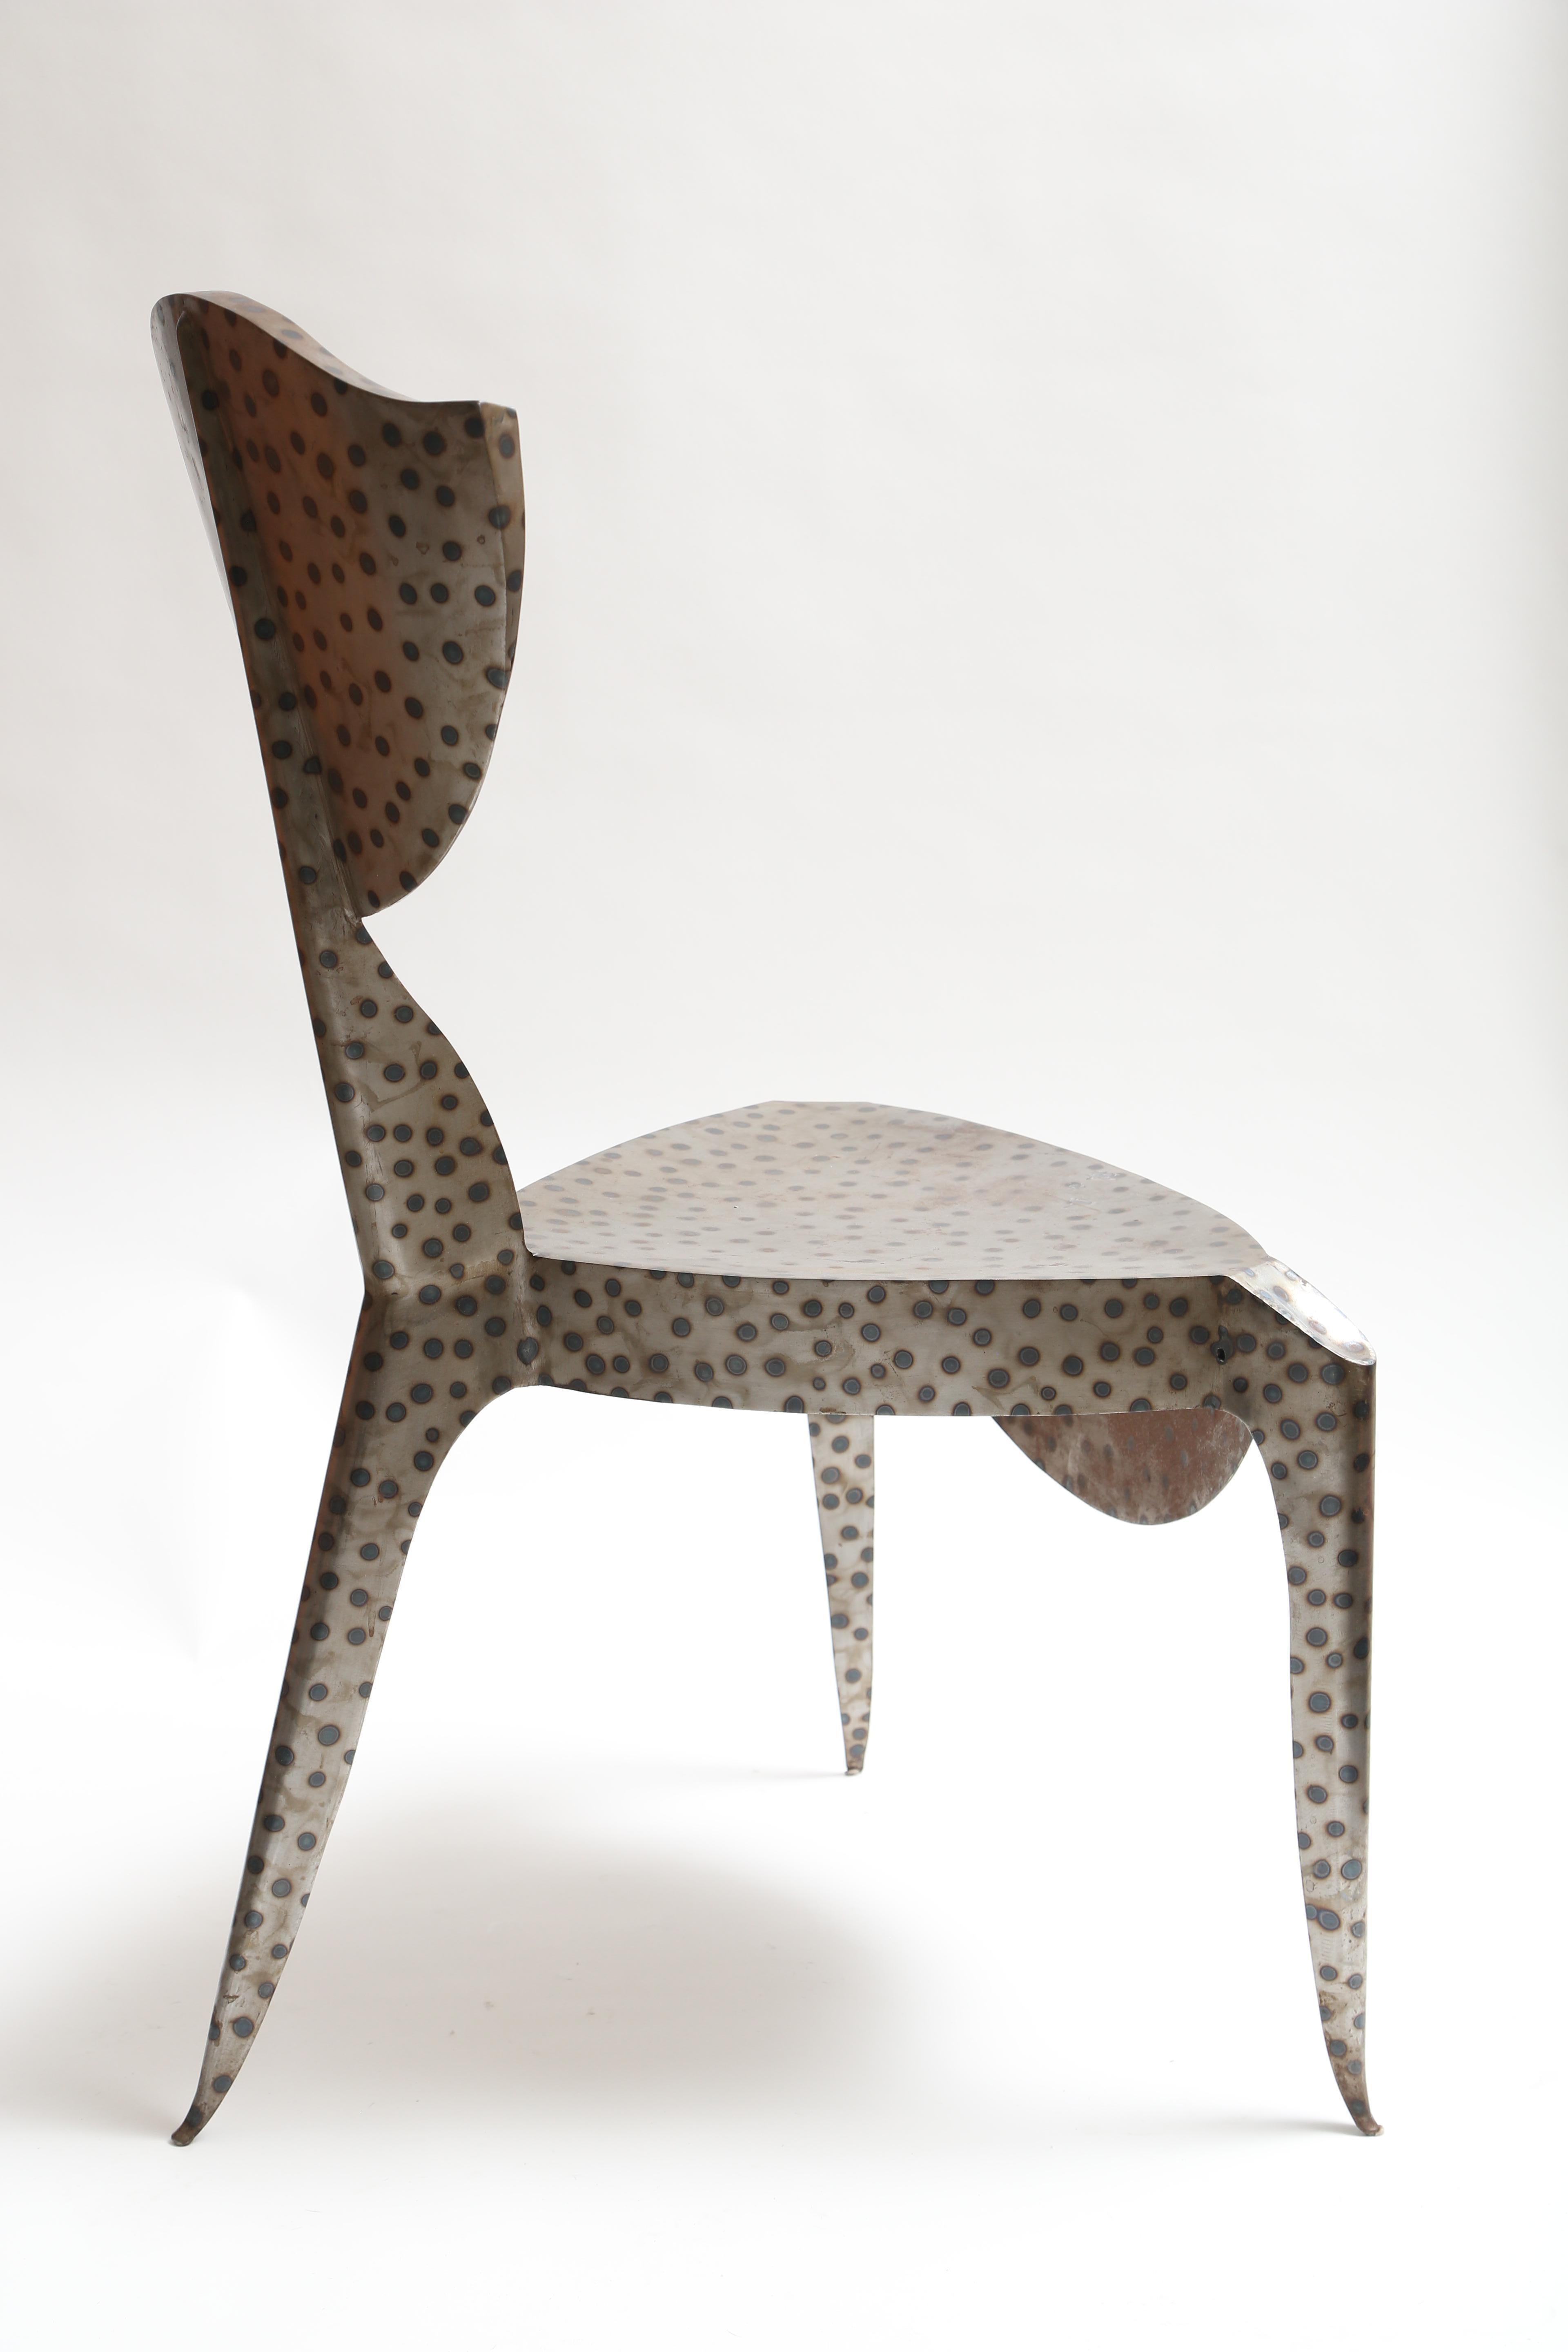 andre dubreuil chair